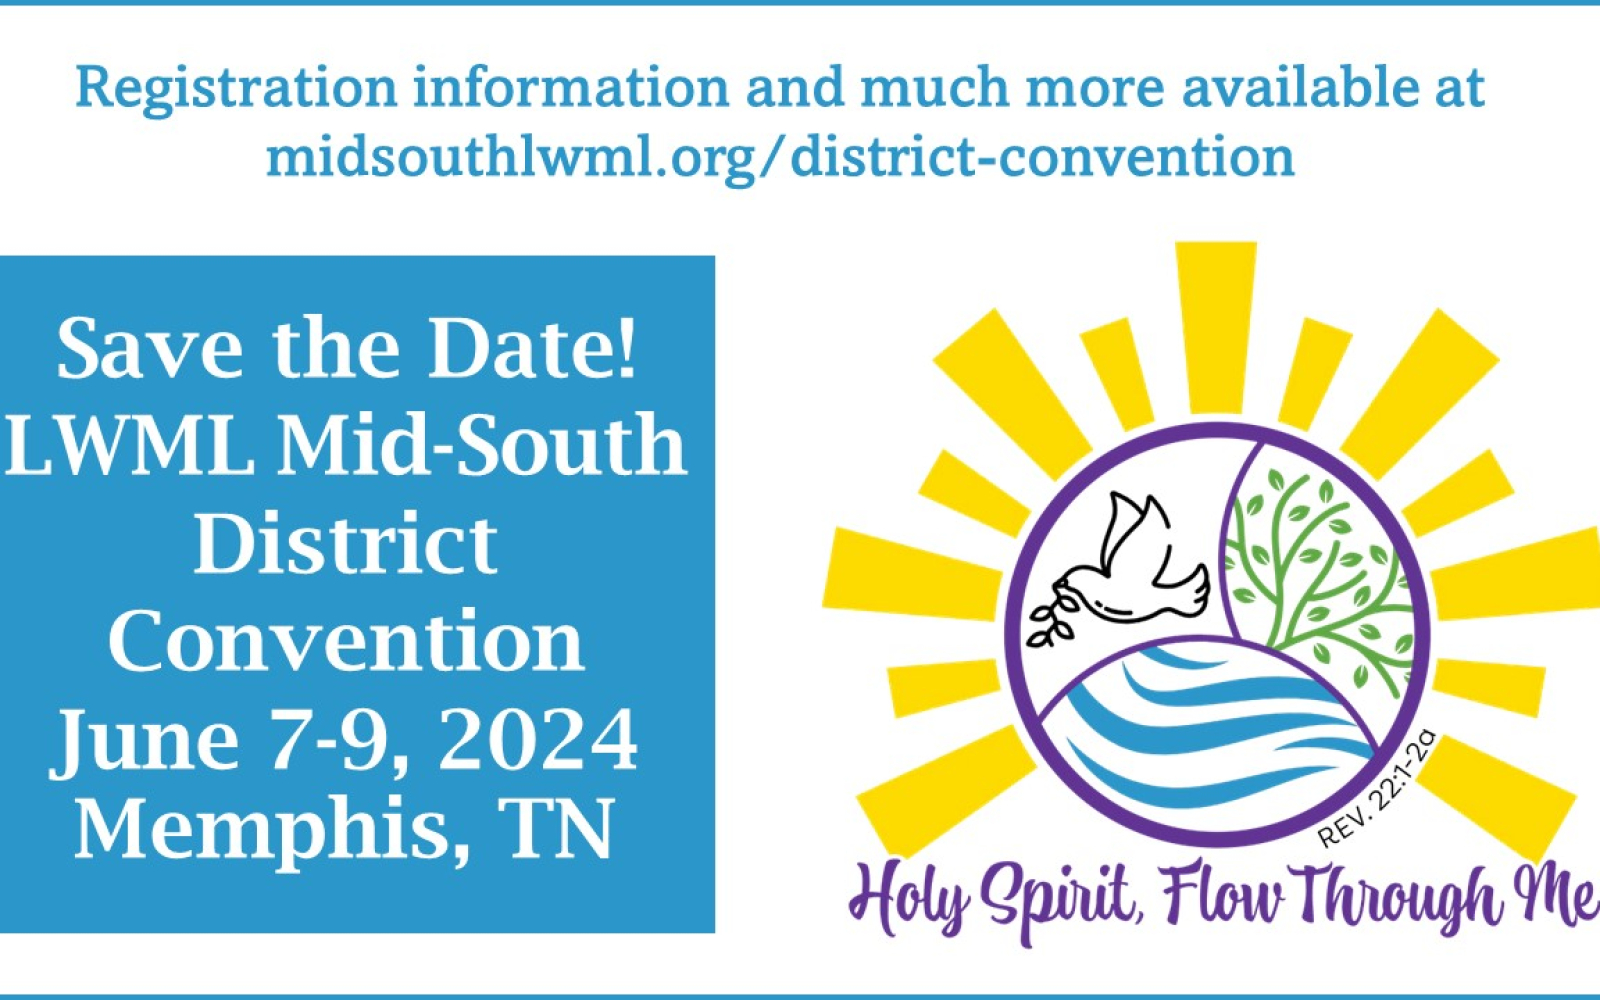 LWML MidSouth District